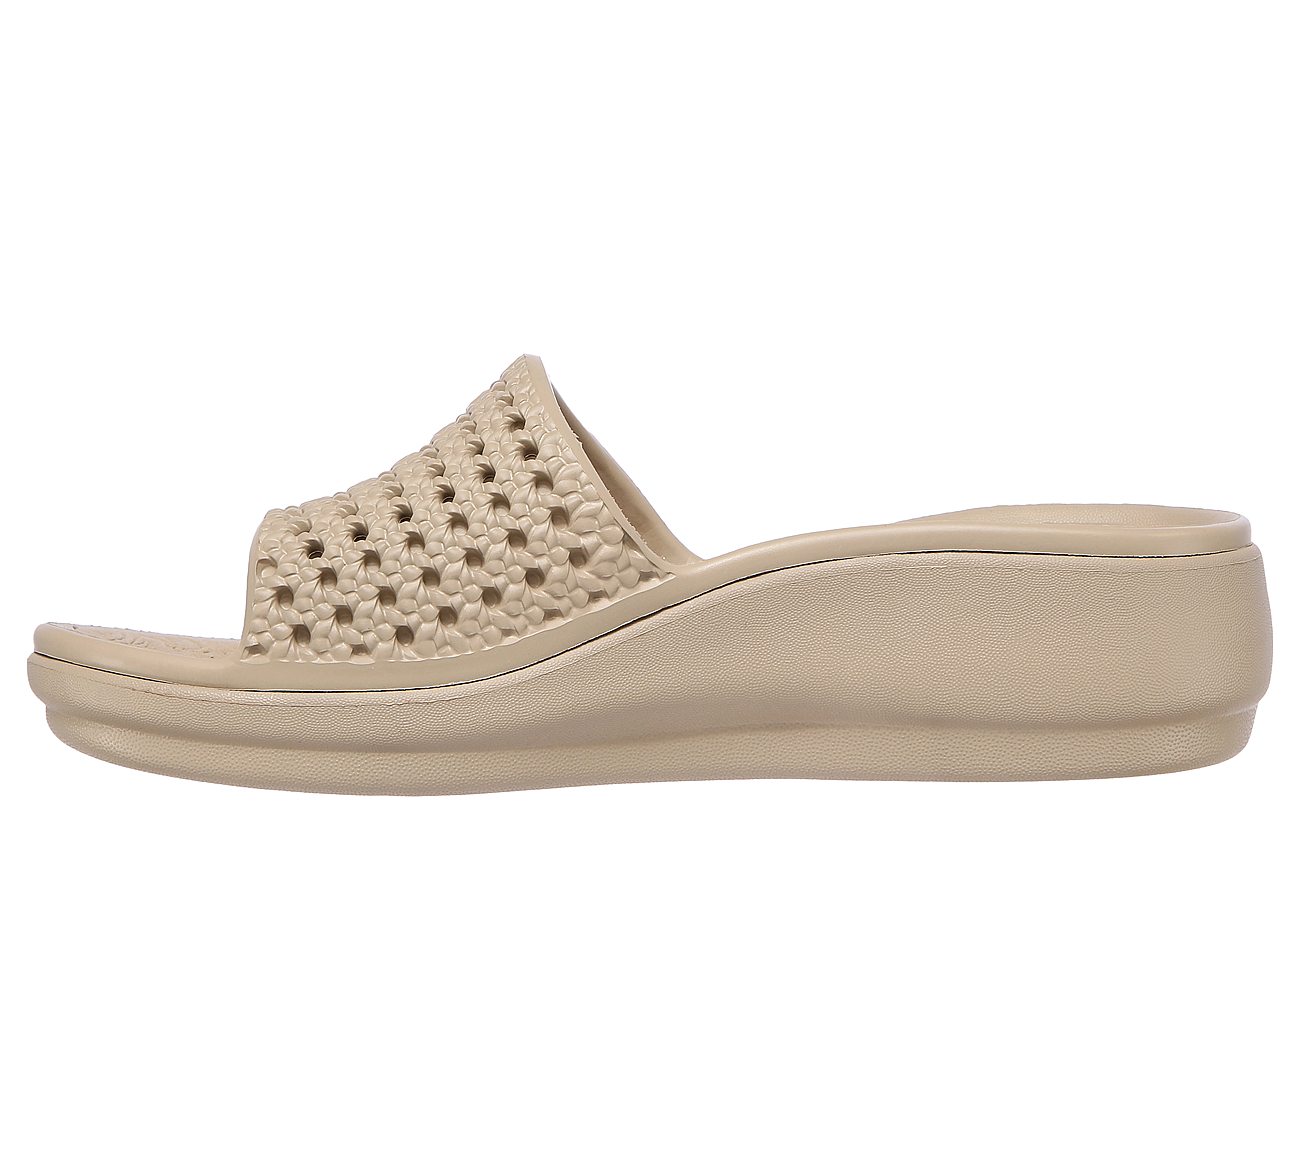 ARCH FIT ASCEND - DARLING, TTAUPE Footwear Left View